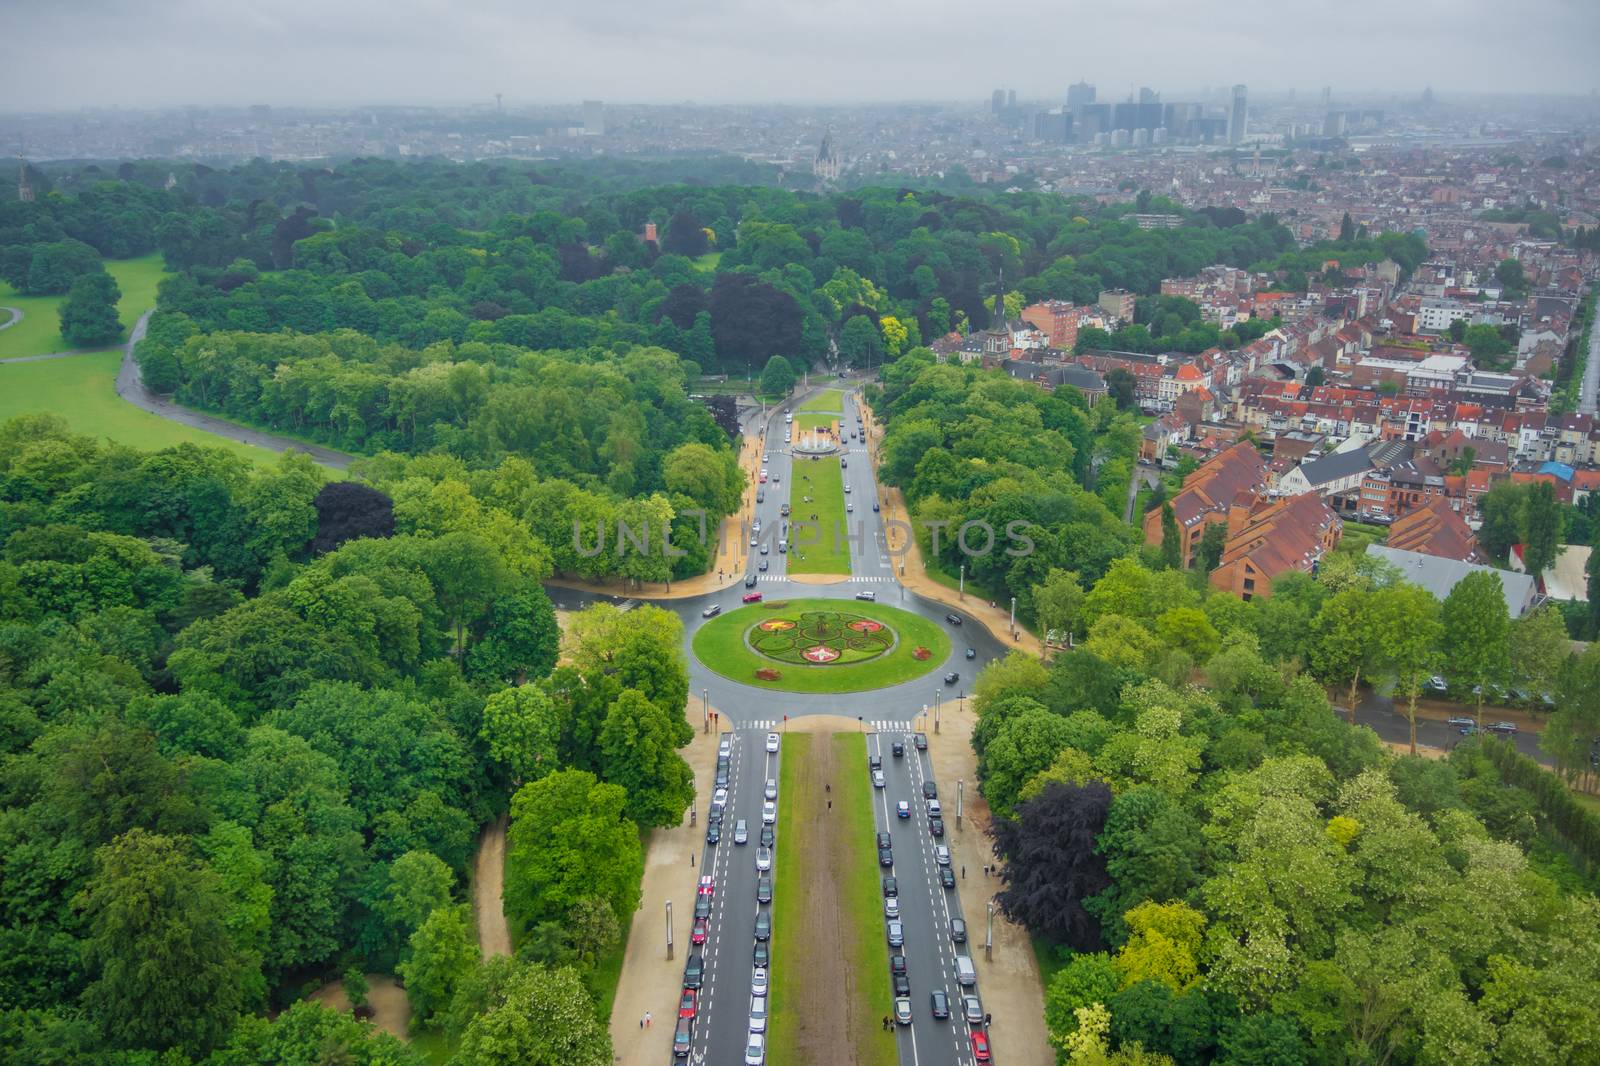 View from the top of the Atomium in Brussels towards town center